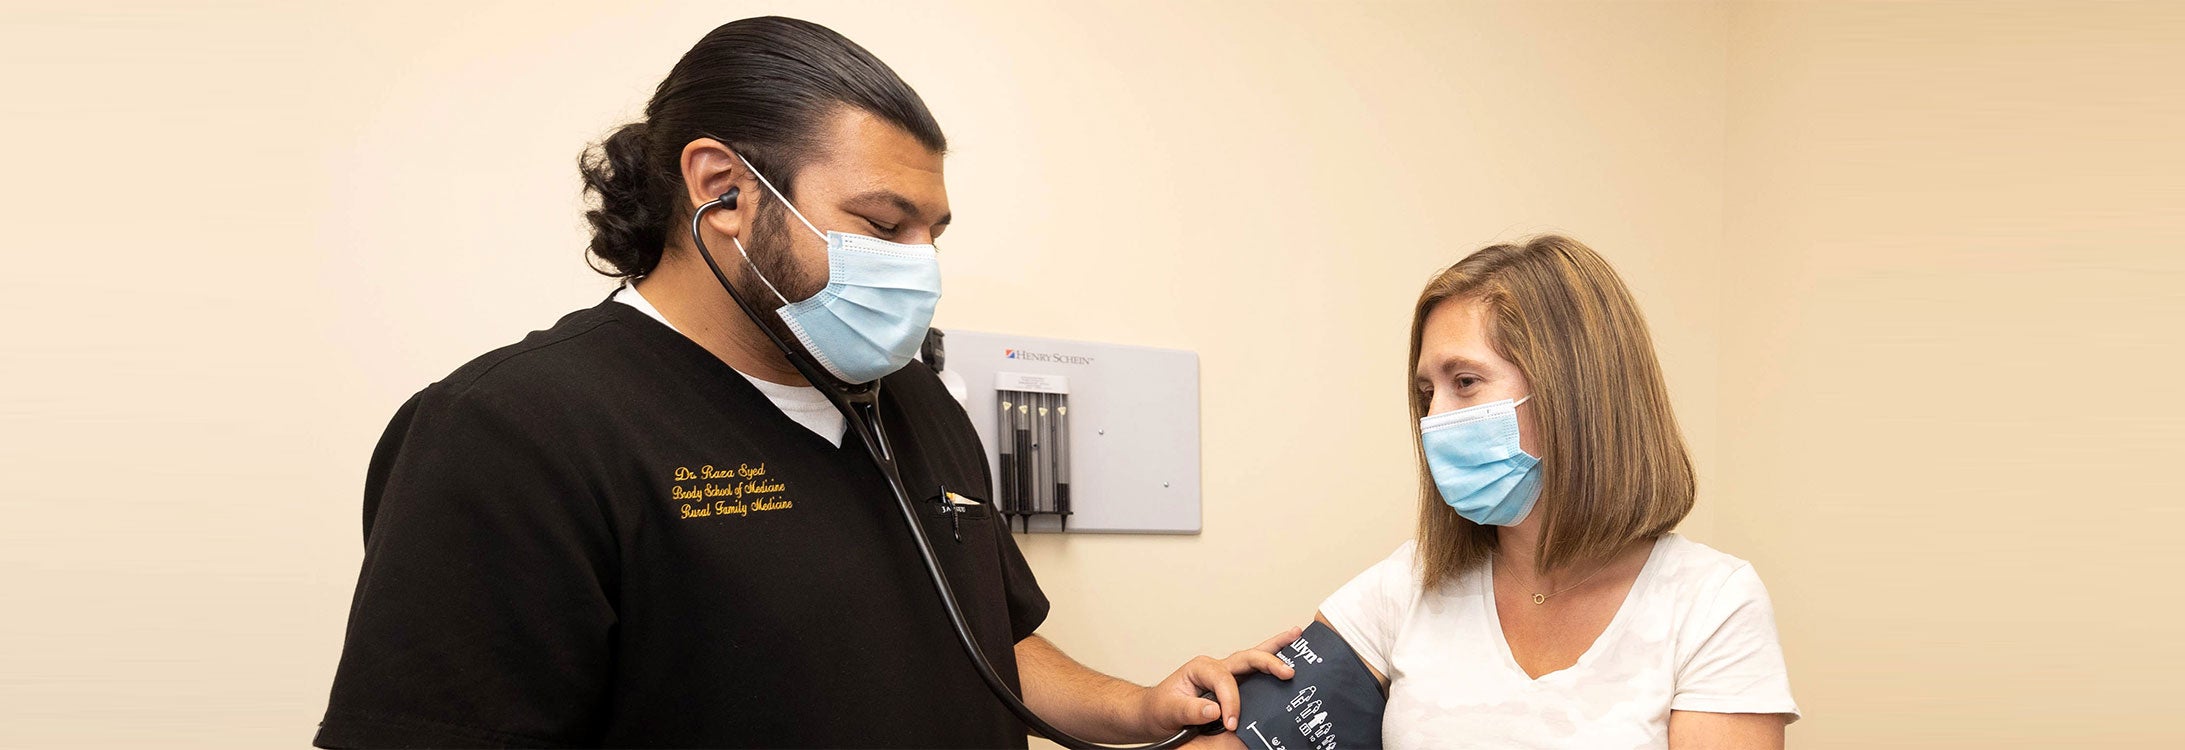 Dr. Raza Syed, one of the first residents in ECU and Vidant Health’s new rural family medicine residency program, examines a patient at Roanoke Chowan Community Health Center in Ahoskie.